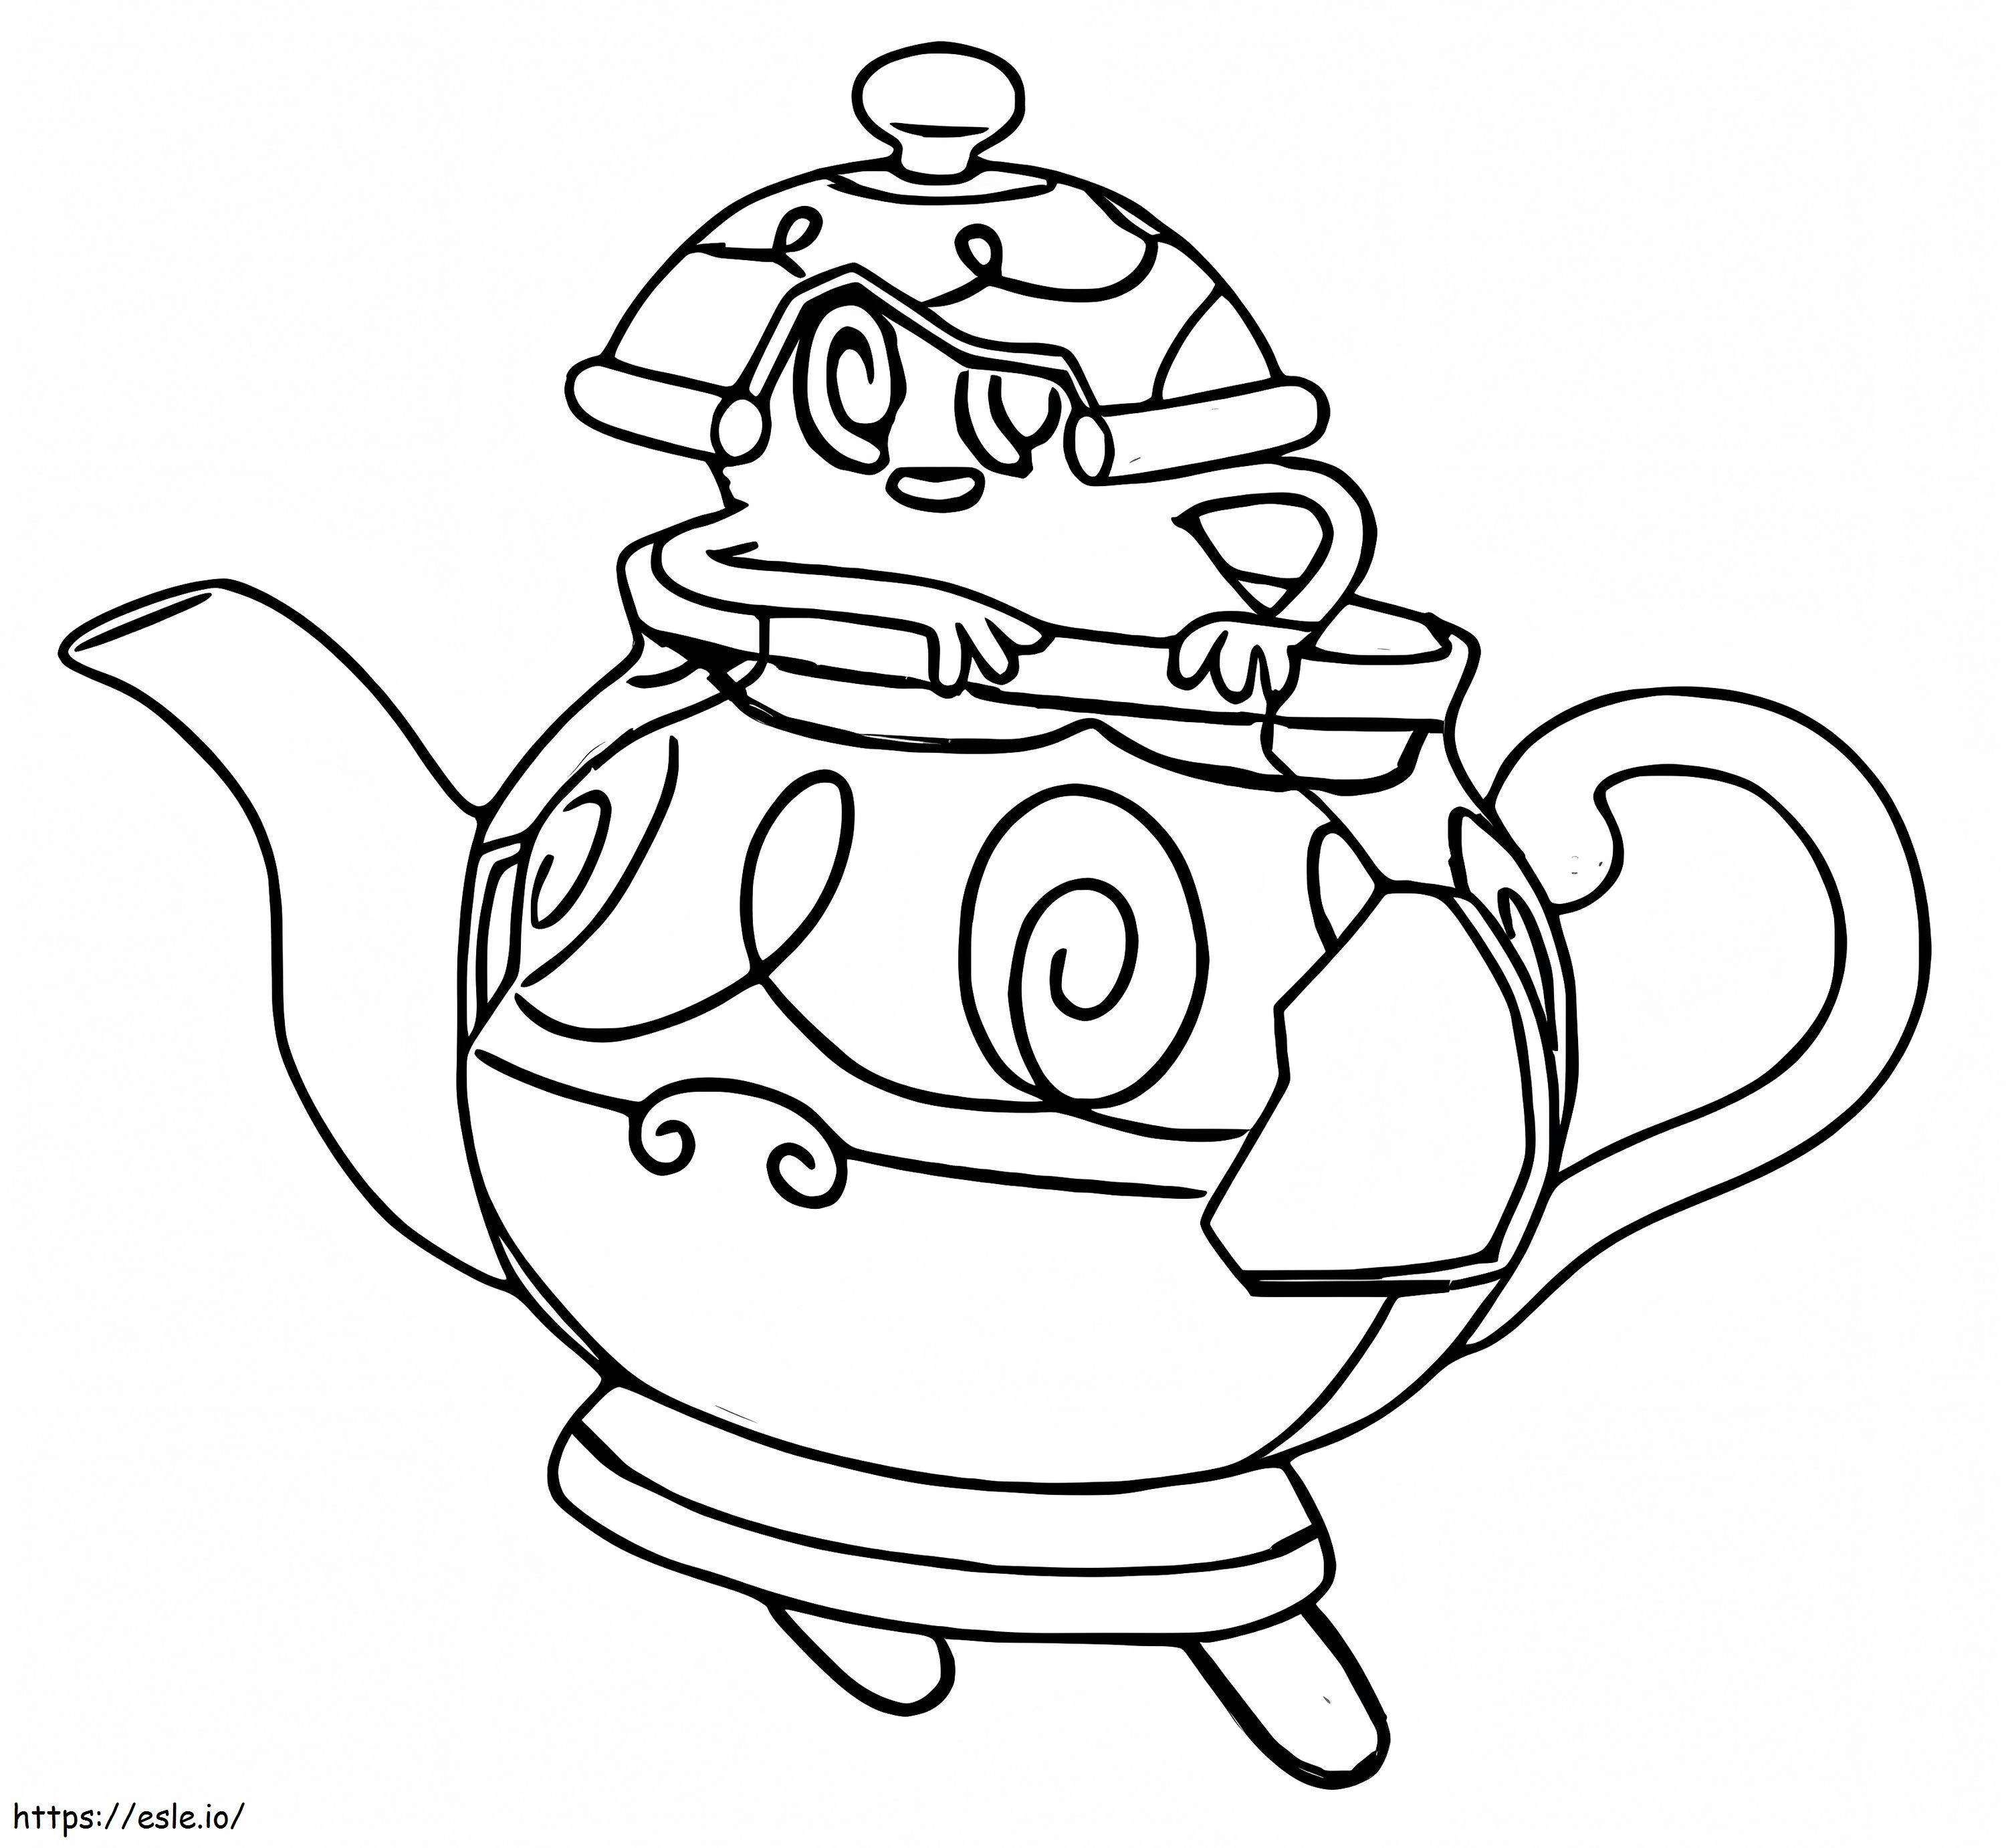 Polteageist 1 coloring page